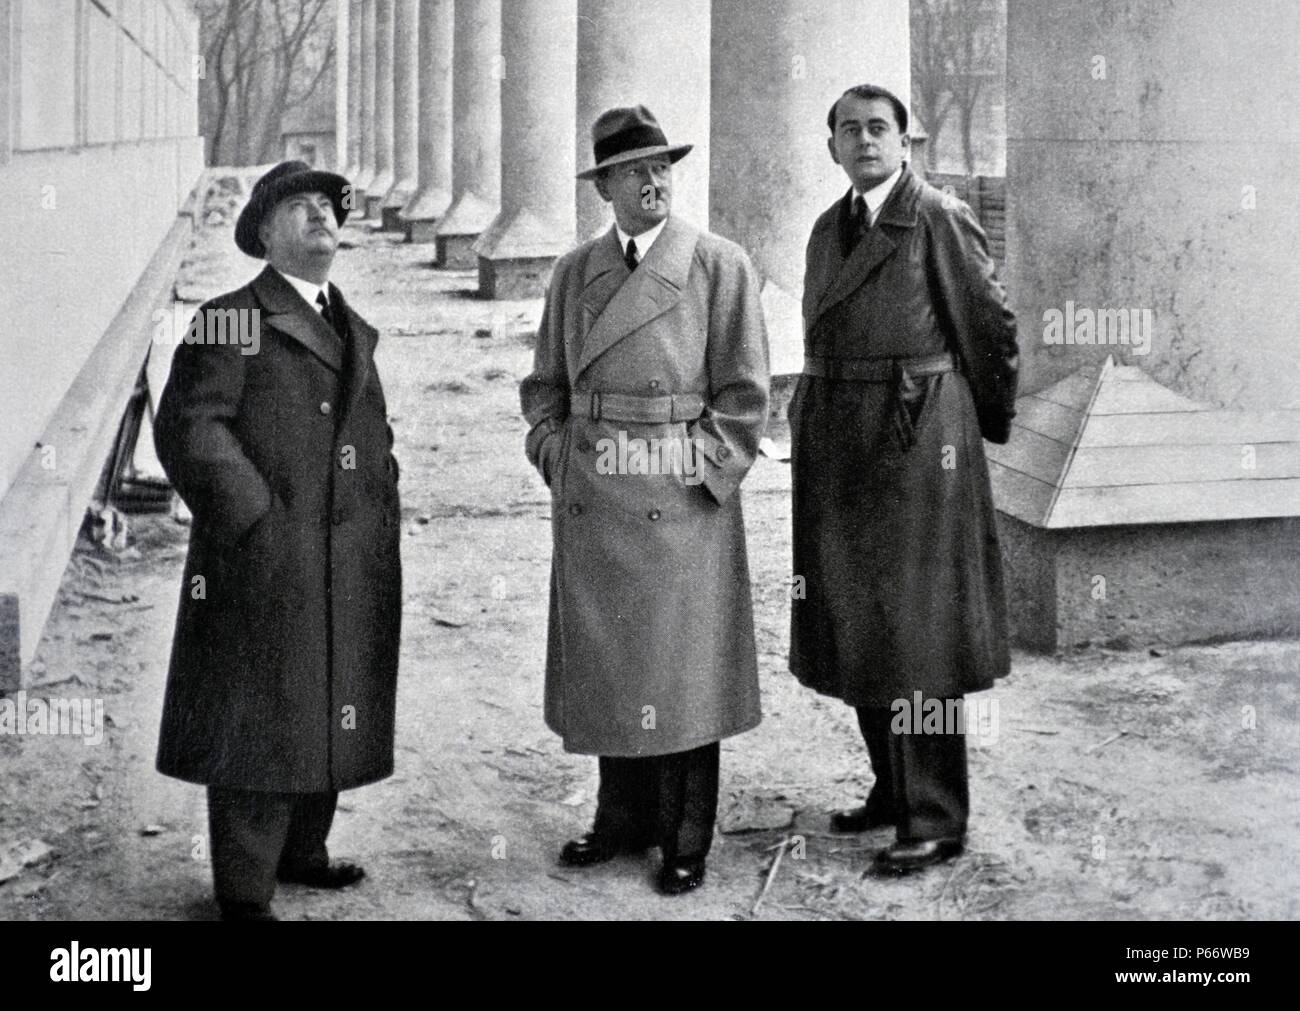 Adolf Hitler 1889-1945. German politician with his architects professor Gall and Albert Speer in Berlin 1937 Stock Photo